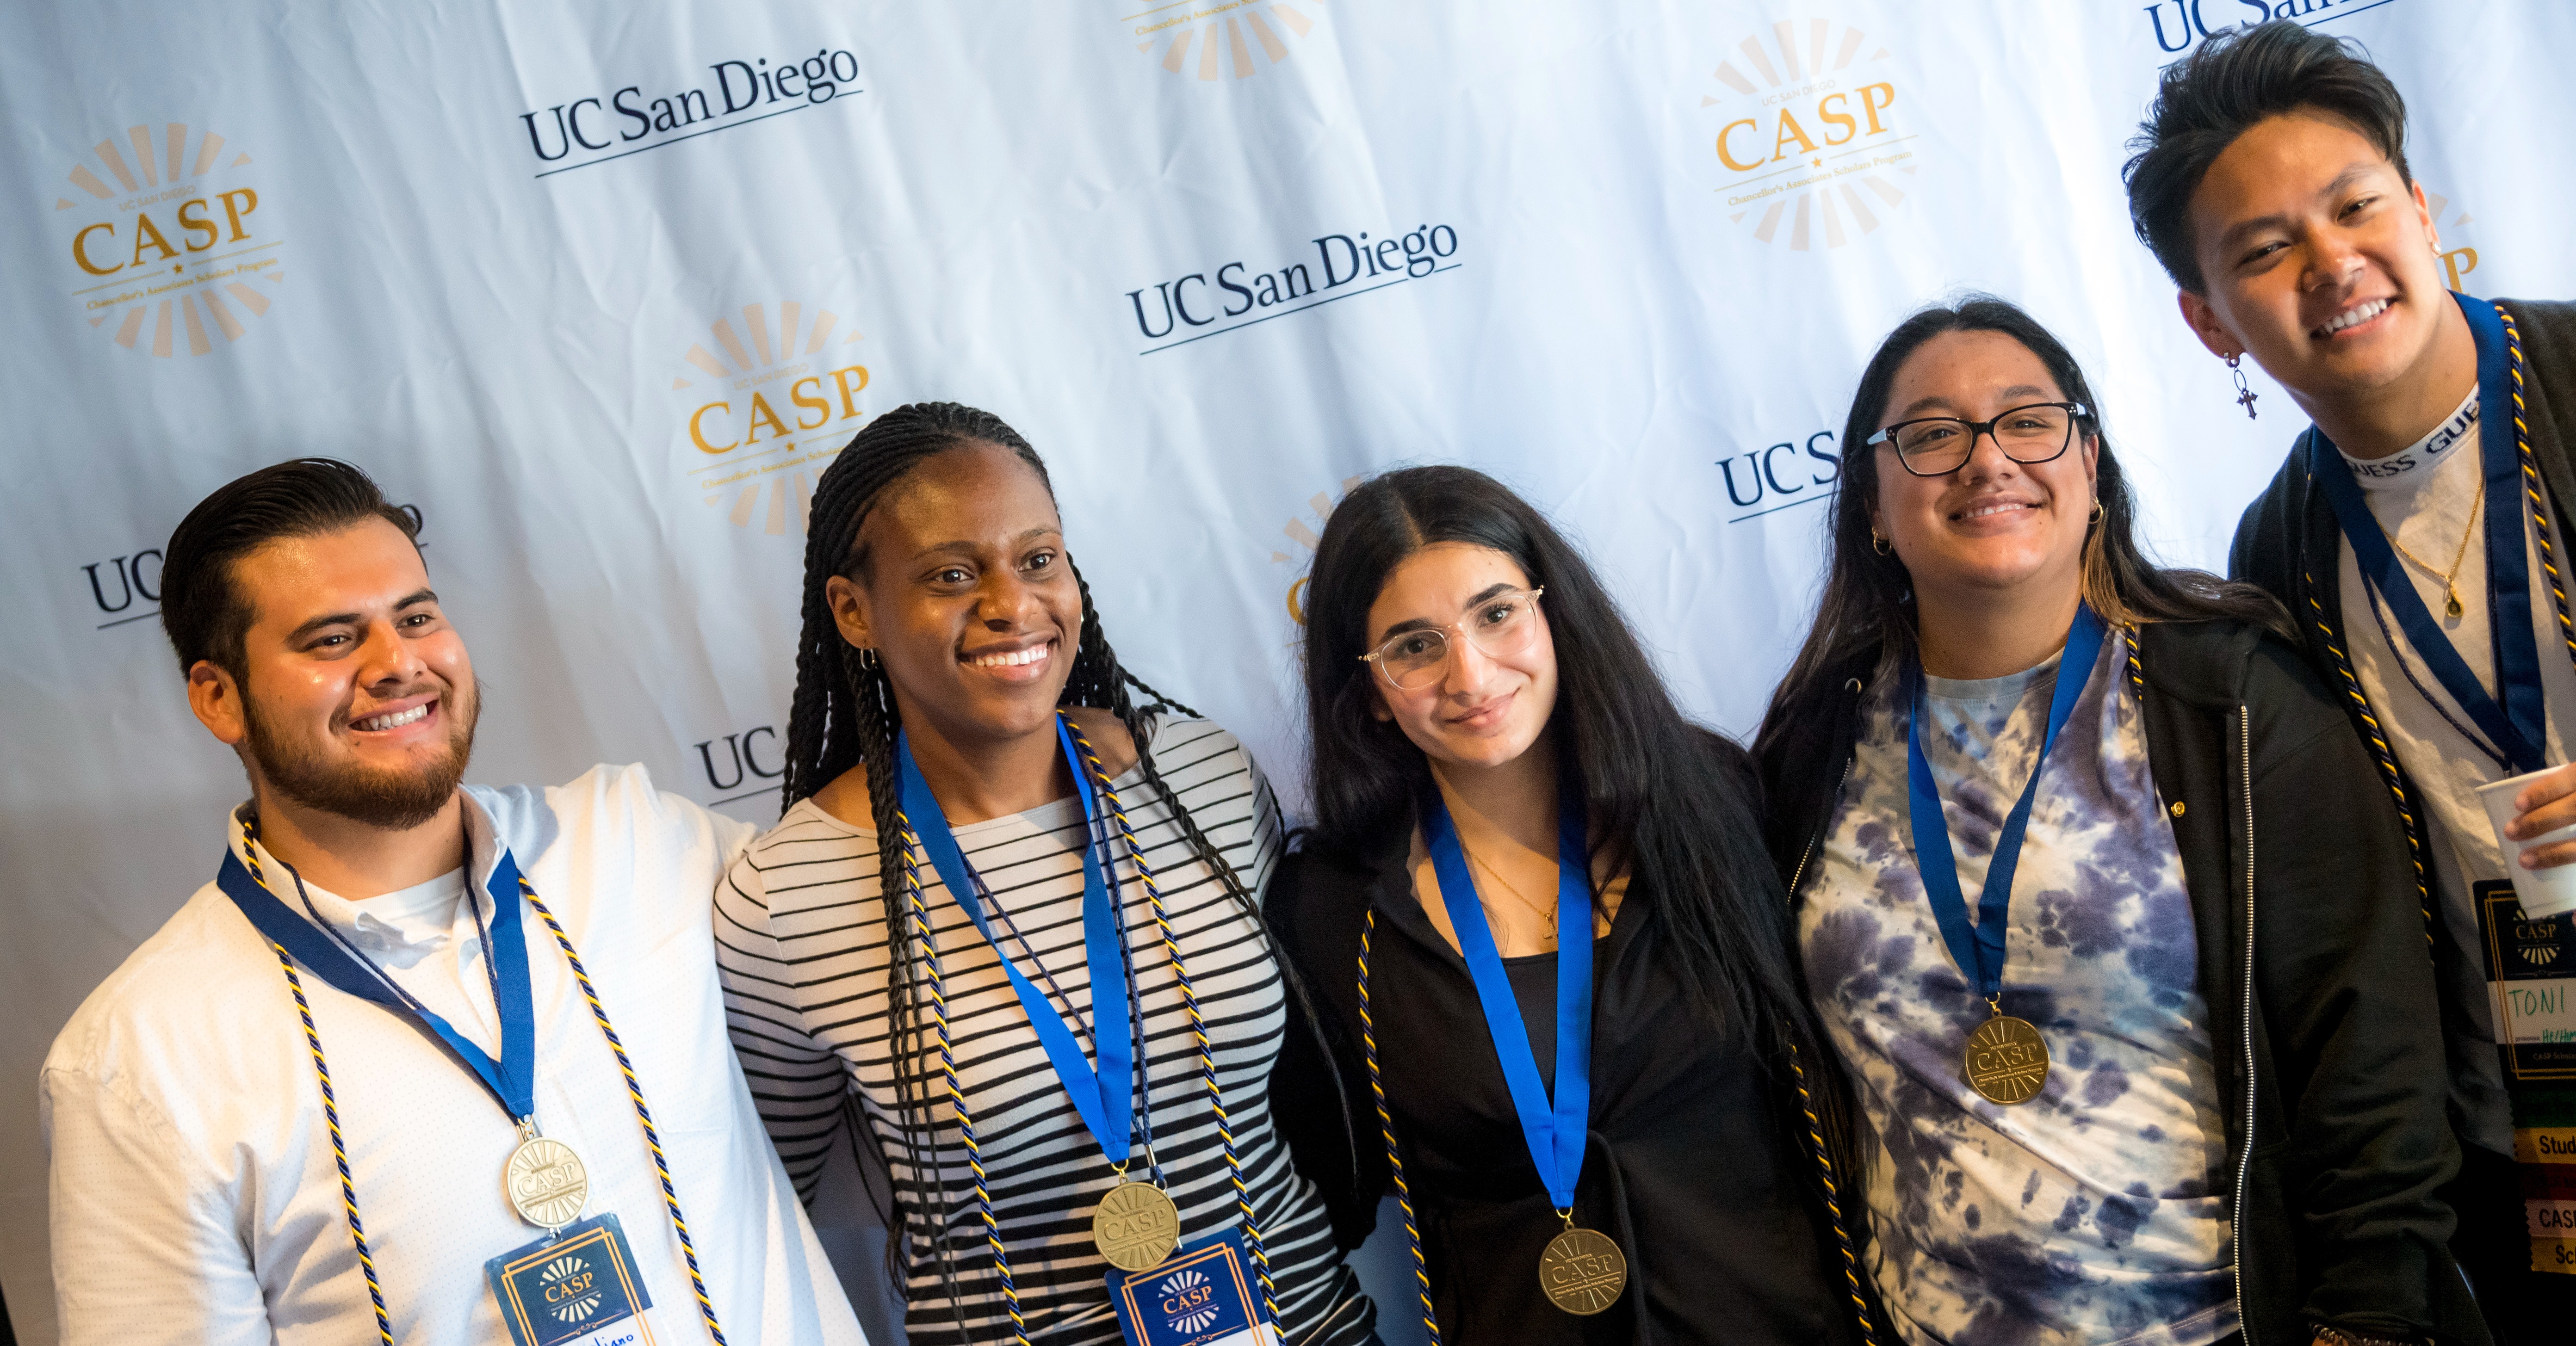 Group of five Chancellor's Associates scholars with medals